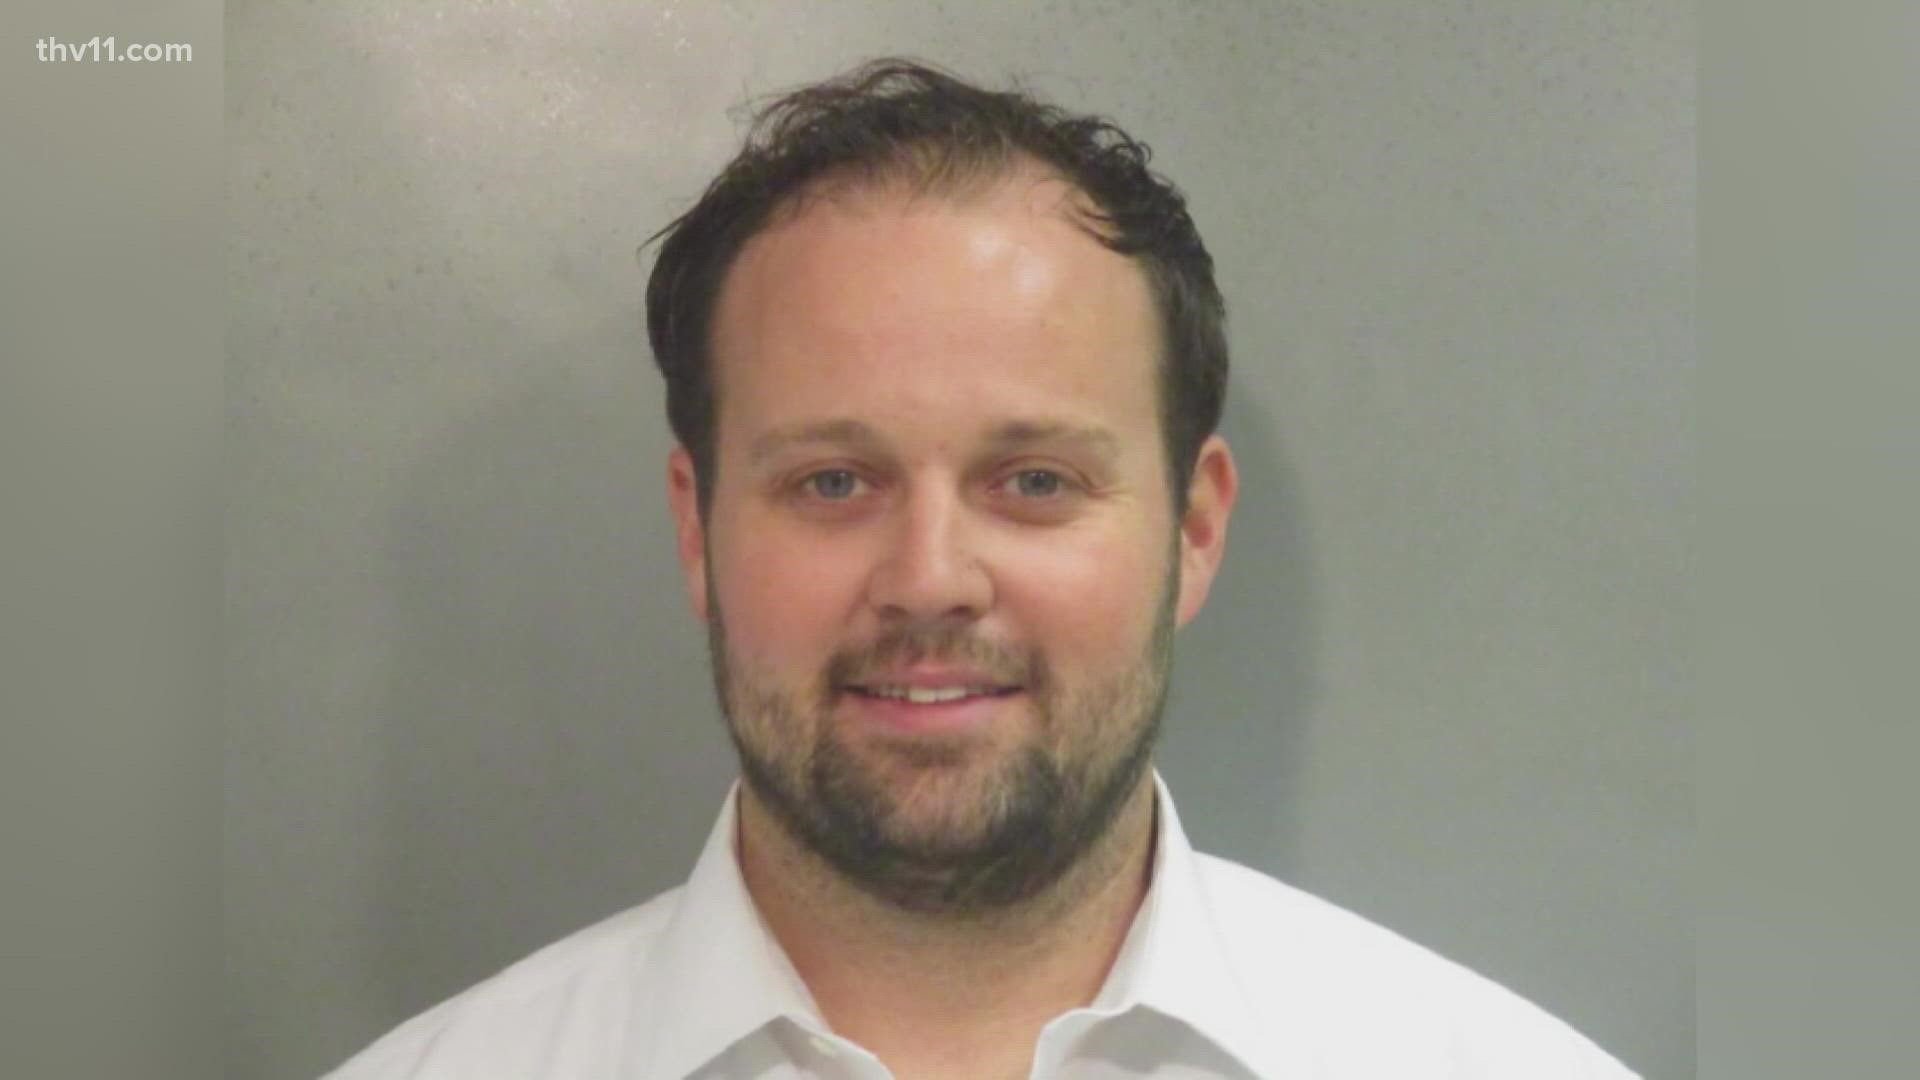 On Feb. 16, Duggar's lawyers will appeal his guilty verdict for receiving and having child sex abuse abusive material in his possession.